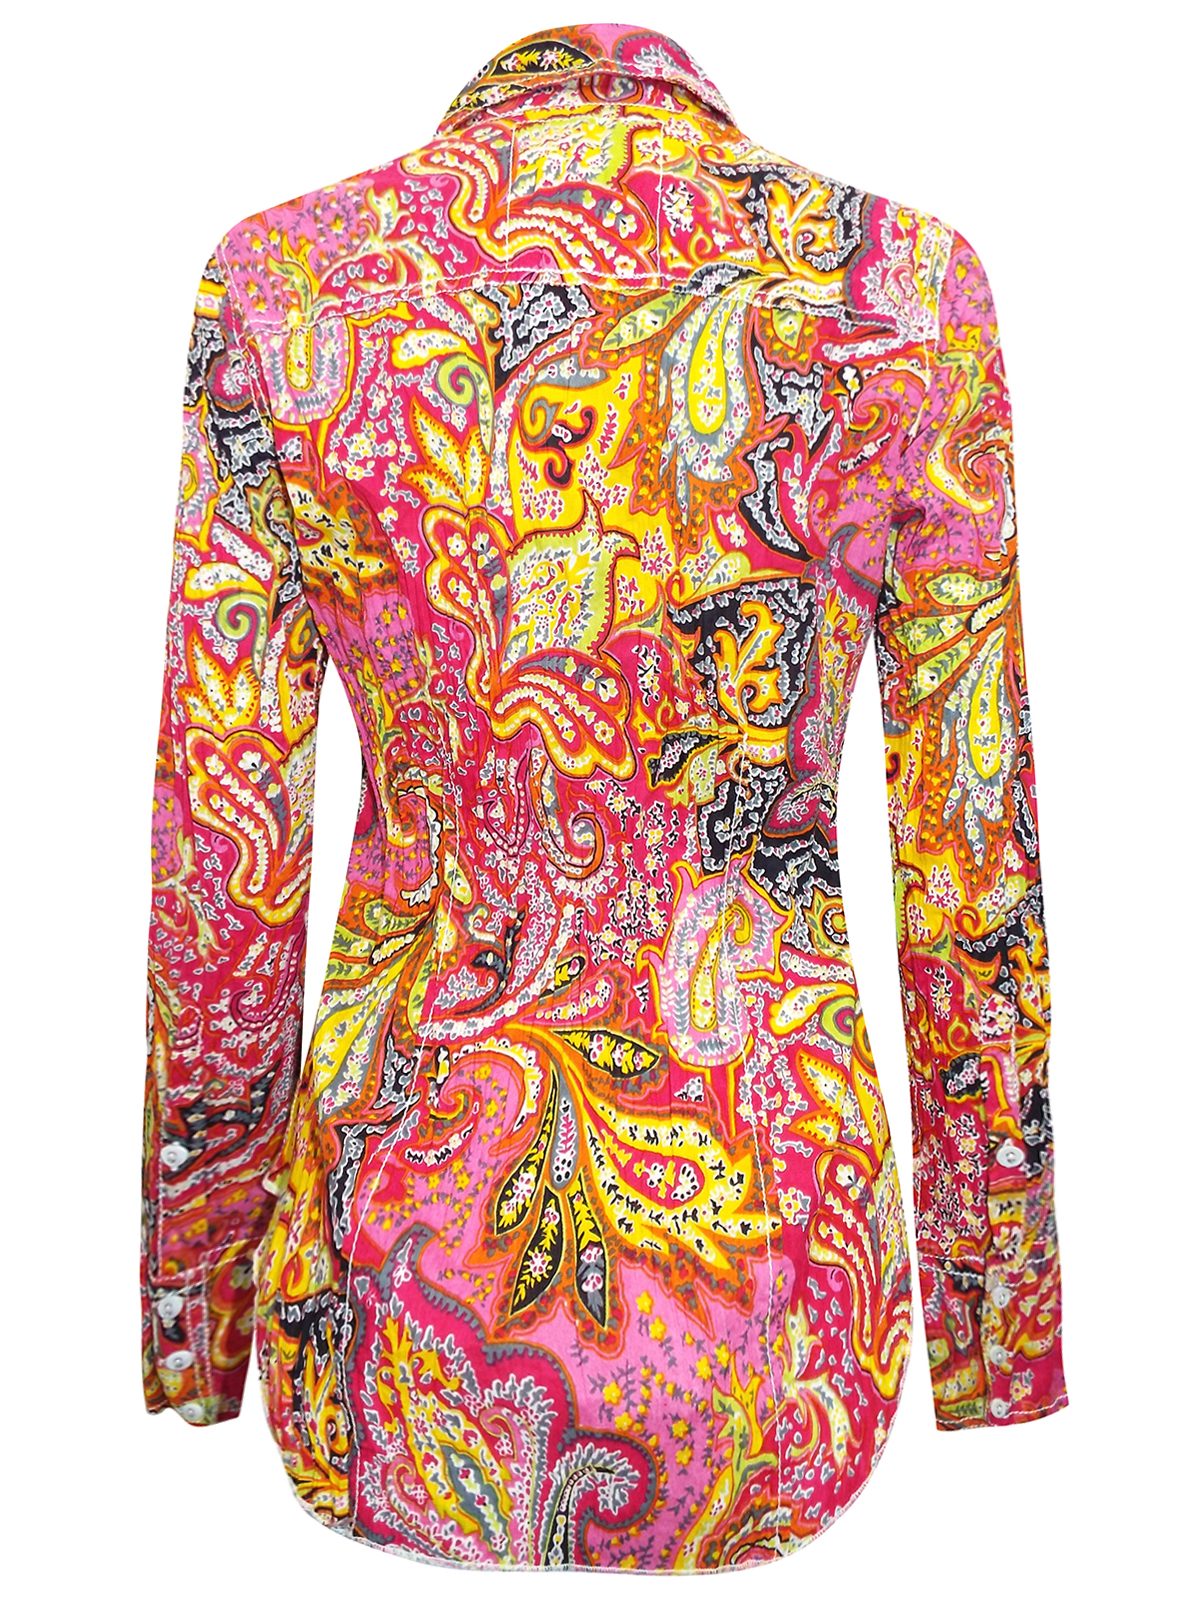 CINO - - CINO MULTI Printed Pure Cotton Crinkle Shirt - Size 10 to 16 ...